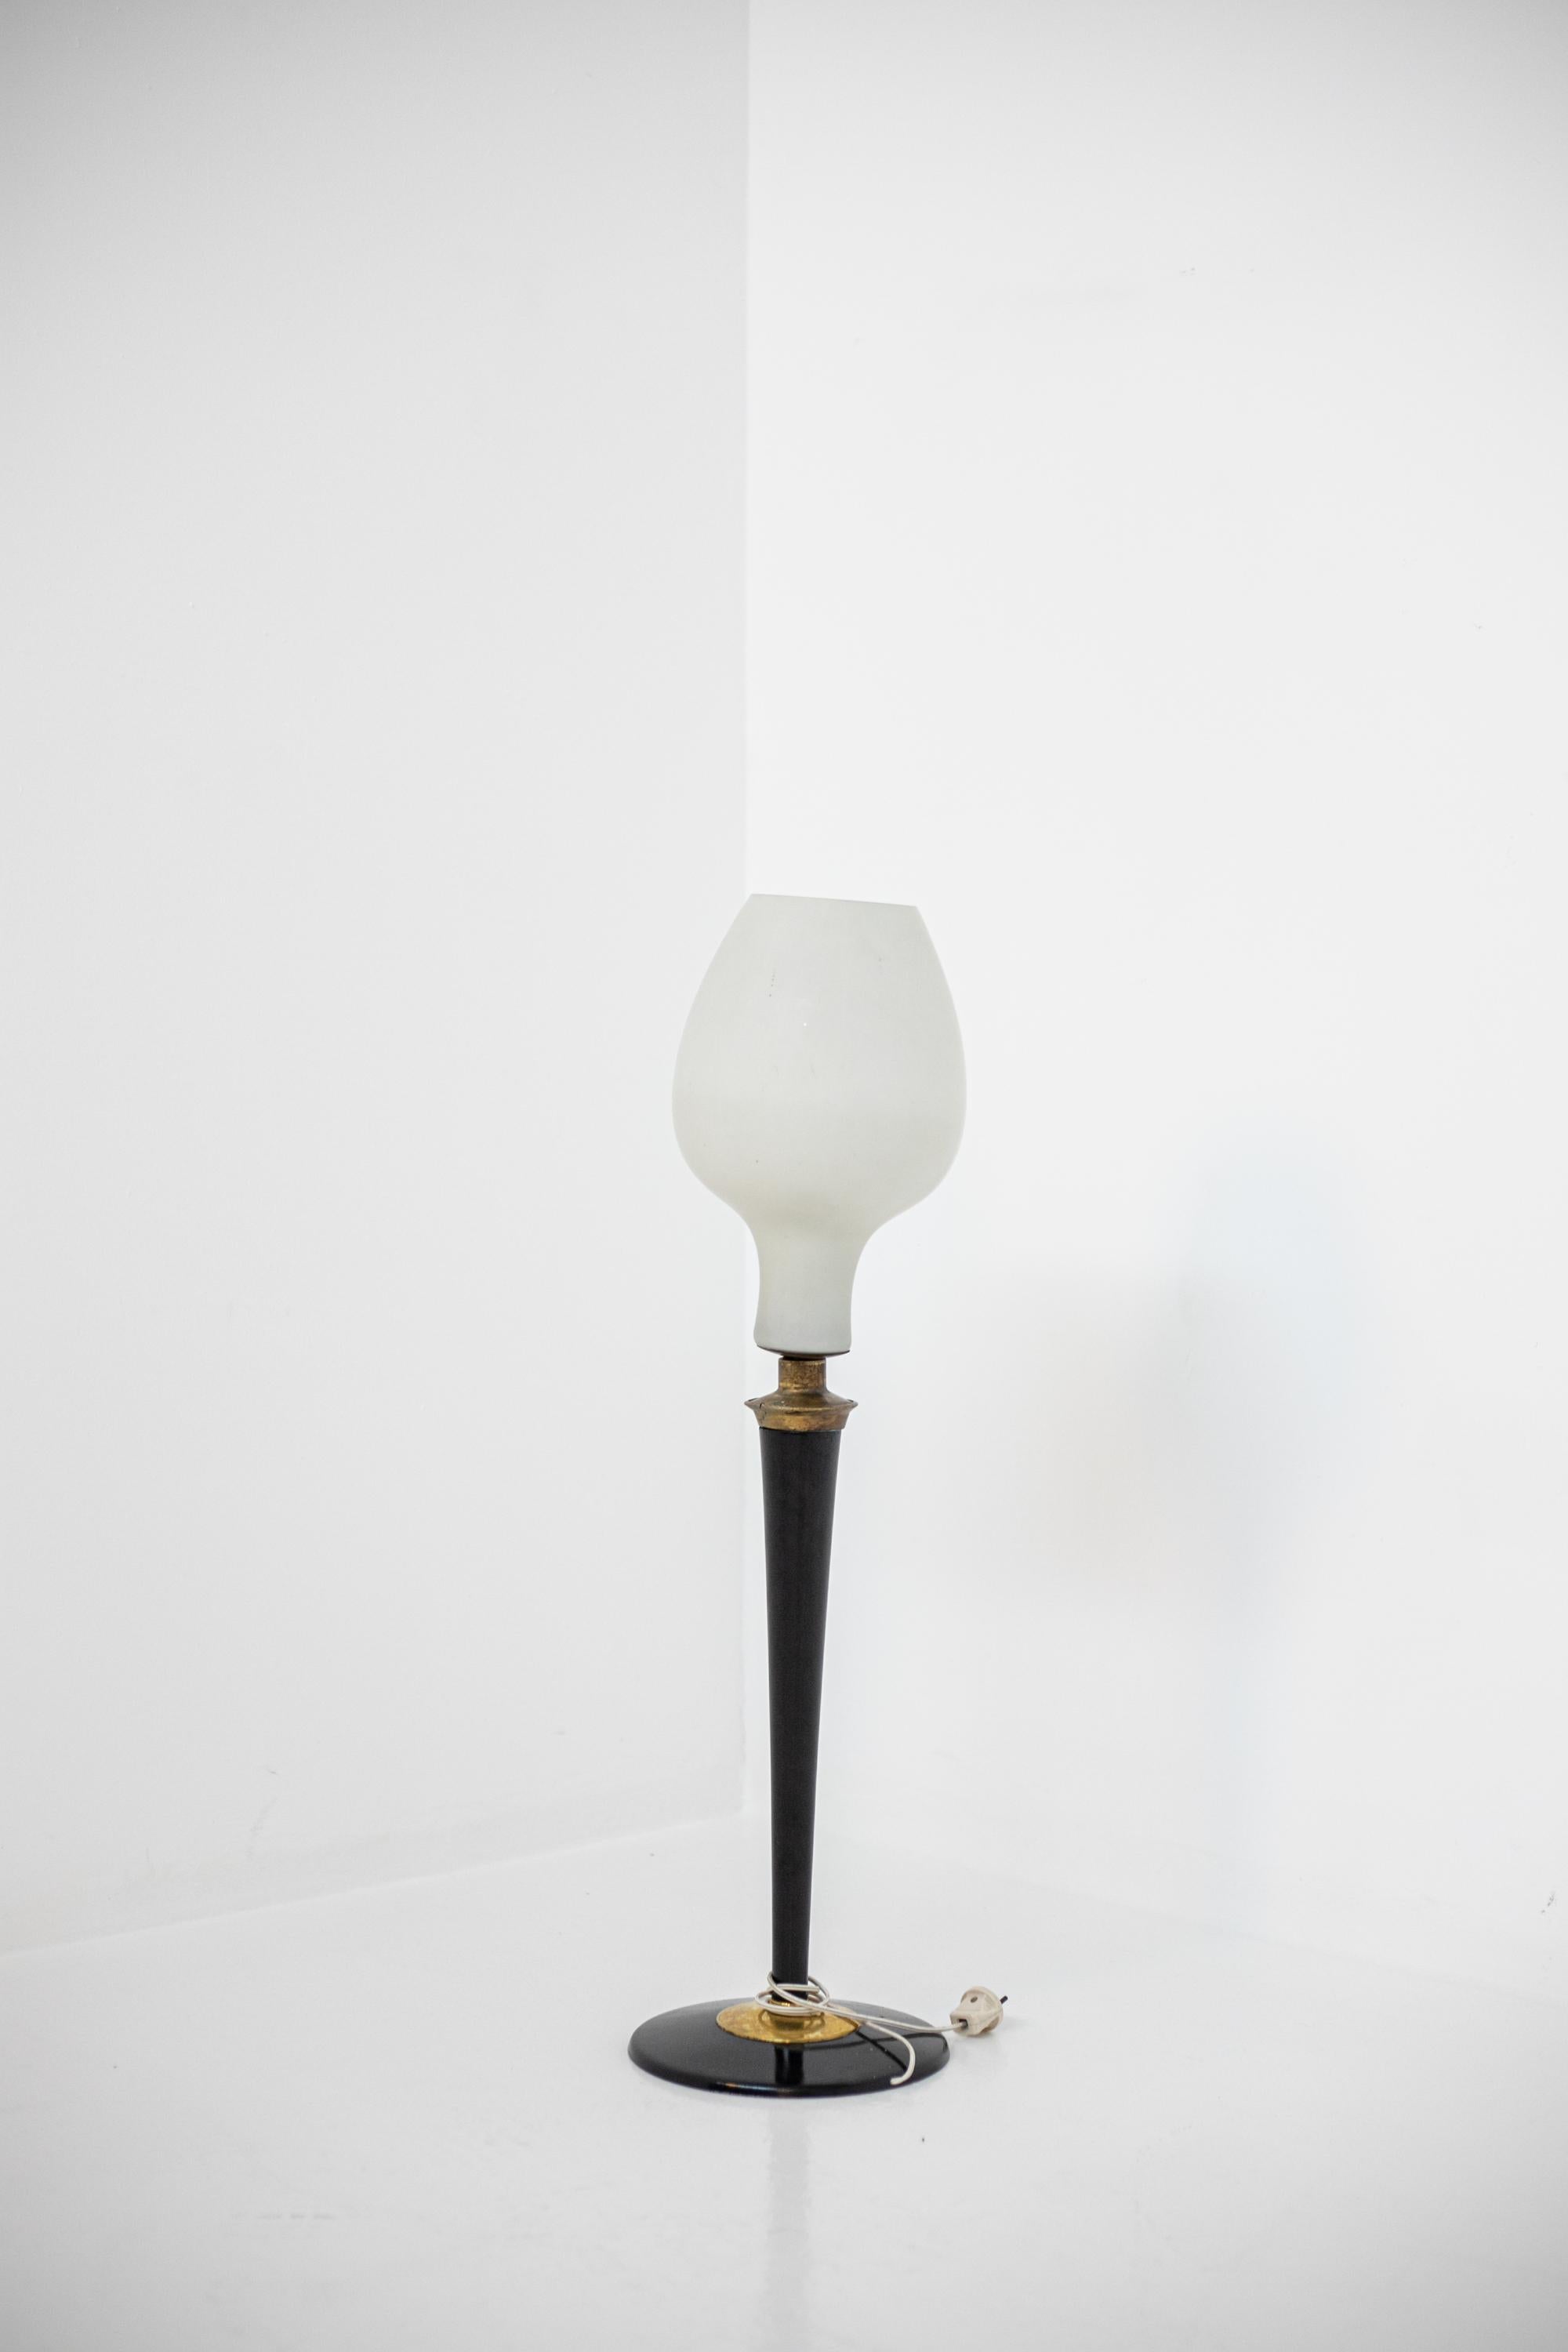 Large Italian table lamp from the 1950s. The lamp has an oval shaped opal glass light cover with a single central light. The lamp has a painted wood structure with brass inserts. The circular shaped base creates stability and harmony to the